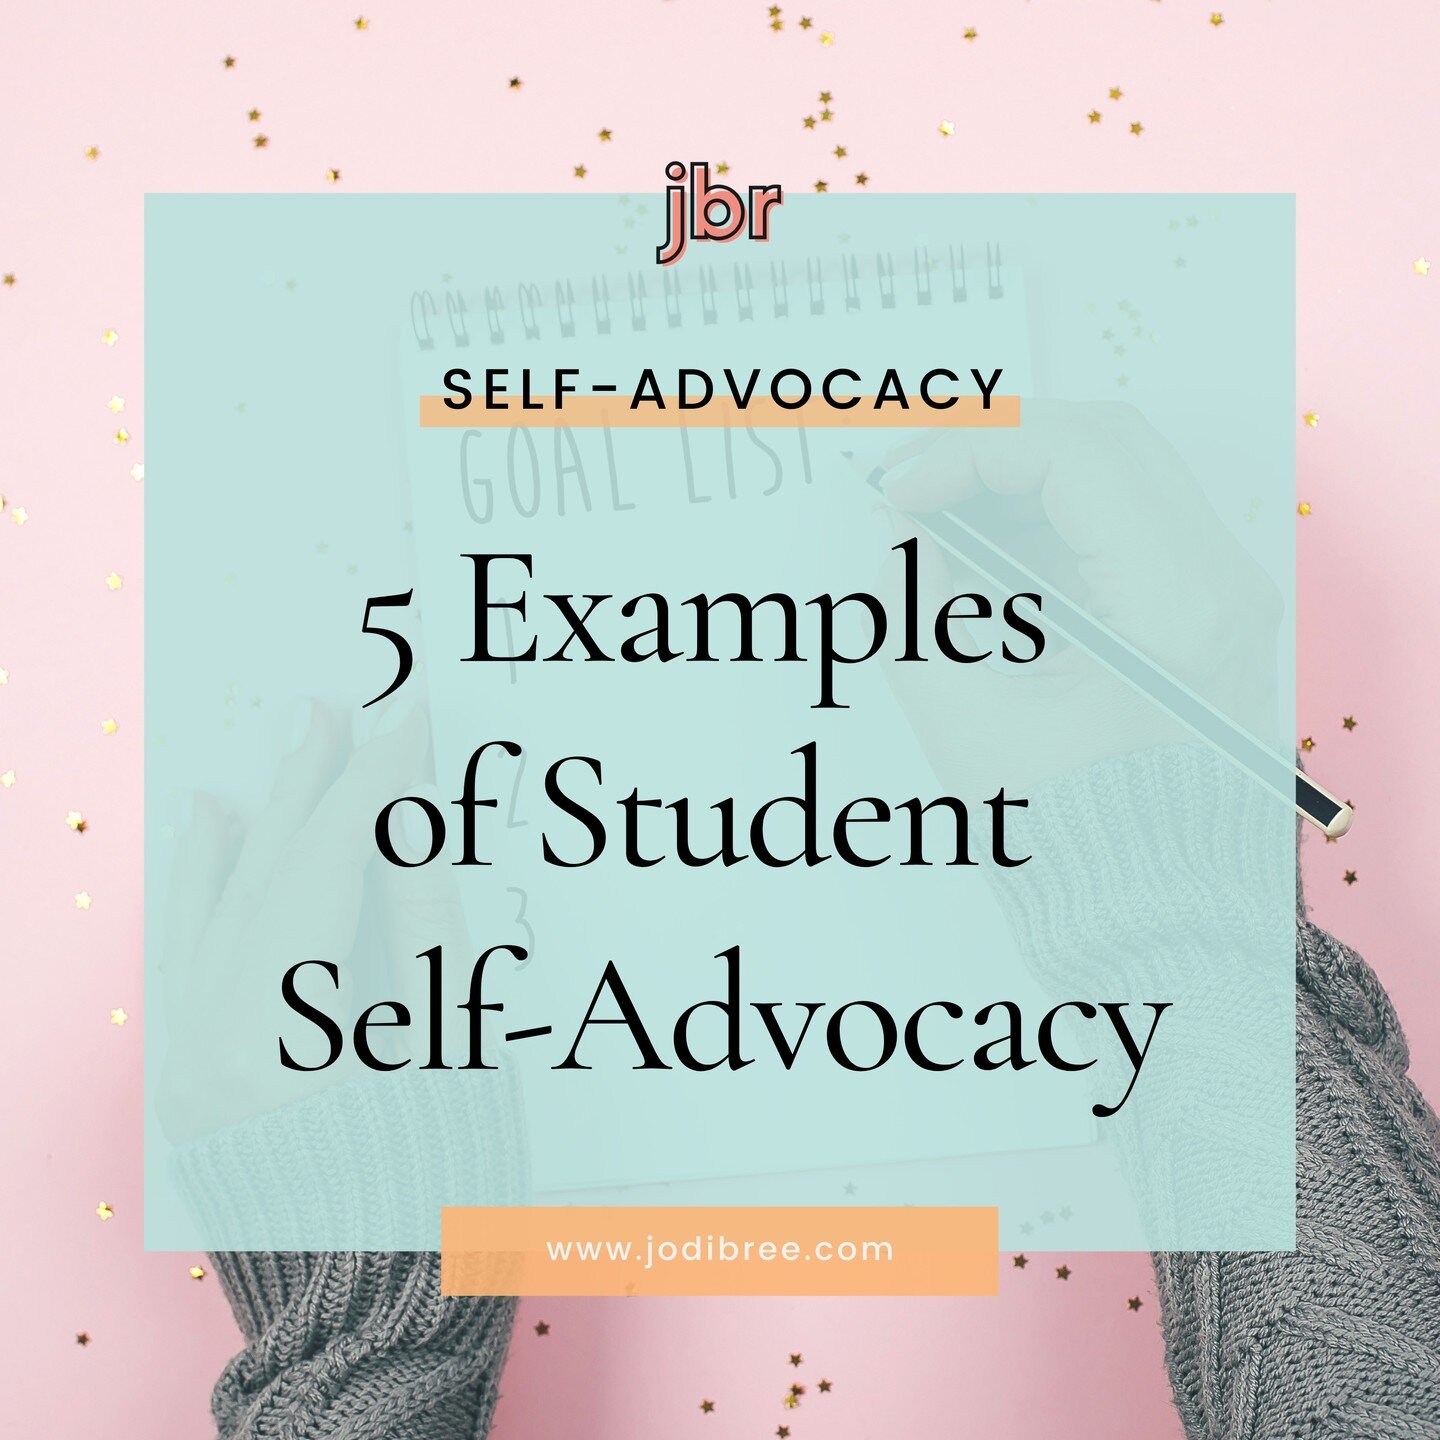 📣 Student self-advocacy is an important skill that can help you succeed in school and life. Here are five examples of how you can advocate for yourself as a student:

1️⃣ Ask questions: Don't be afraid to speak up if you don't understand something. 